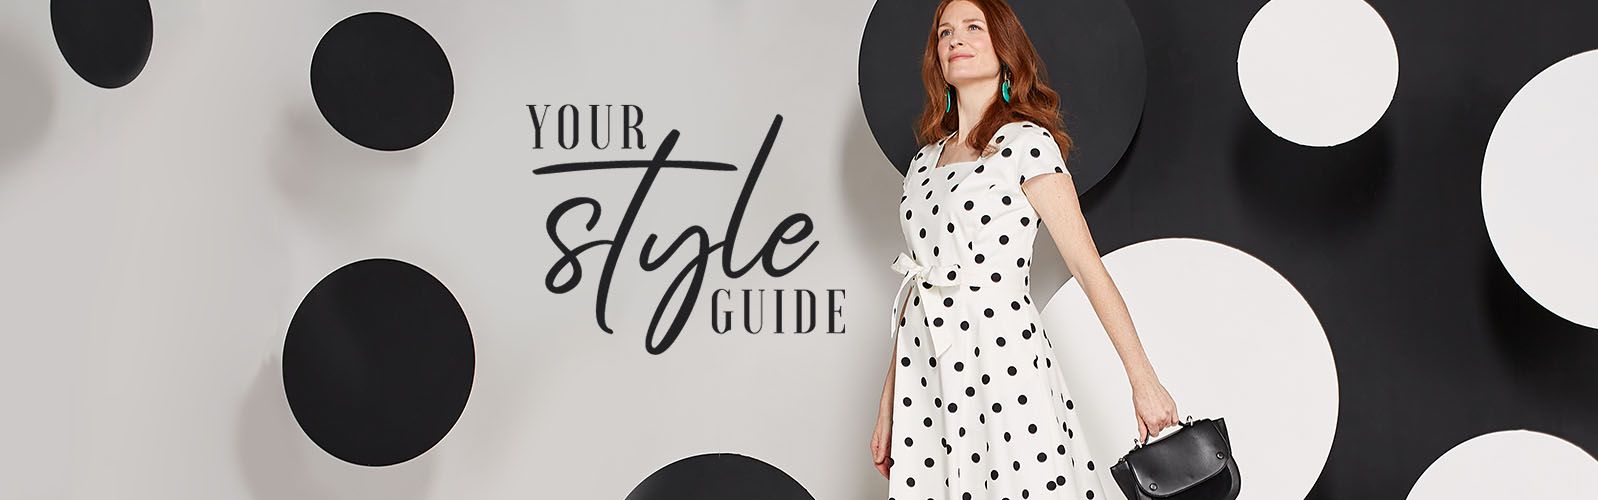 Your Style Guide - Hit the Spot